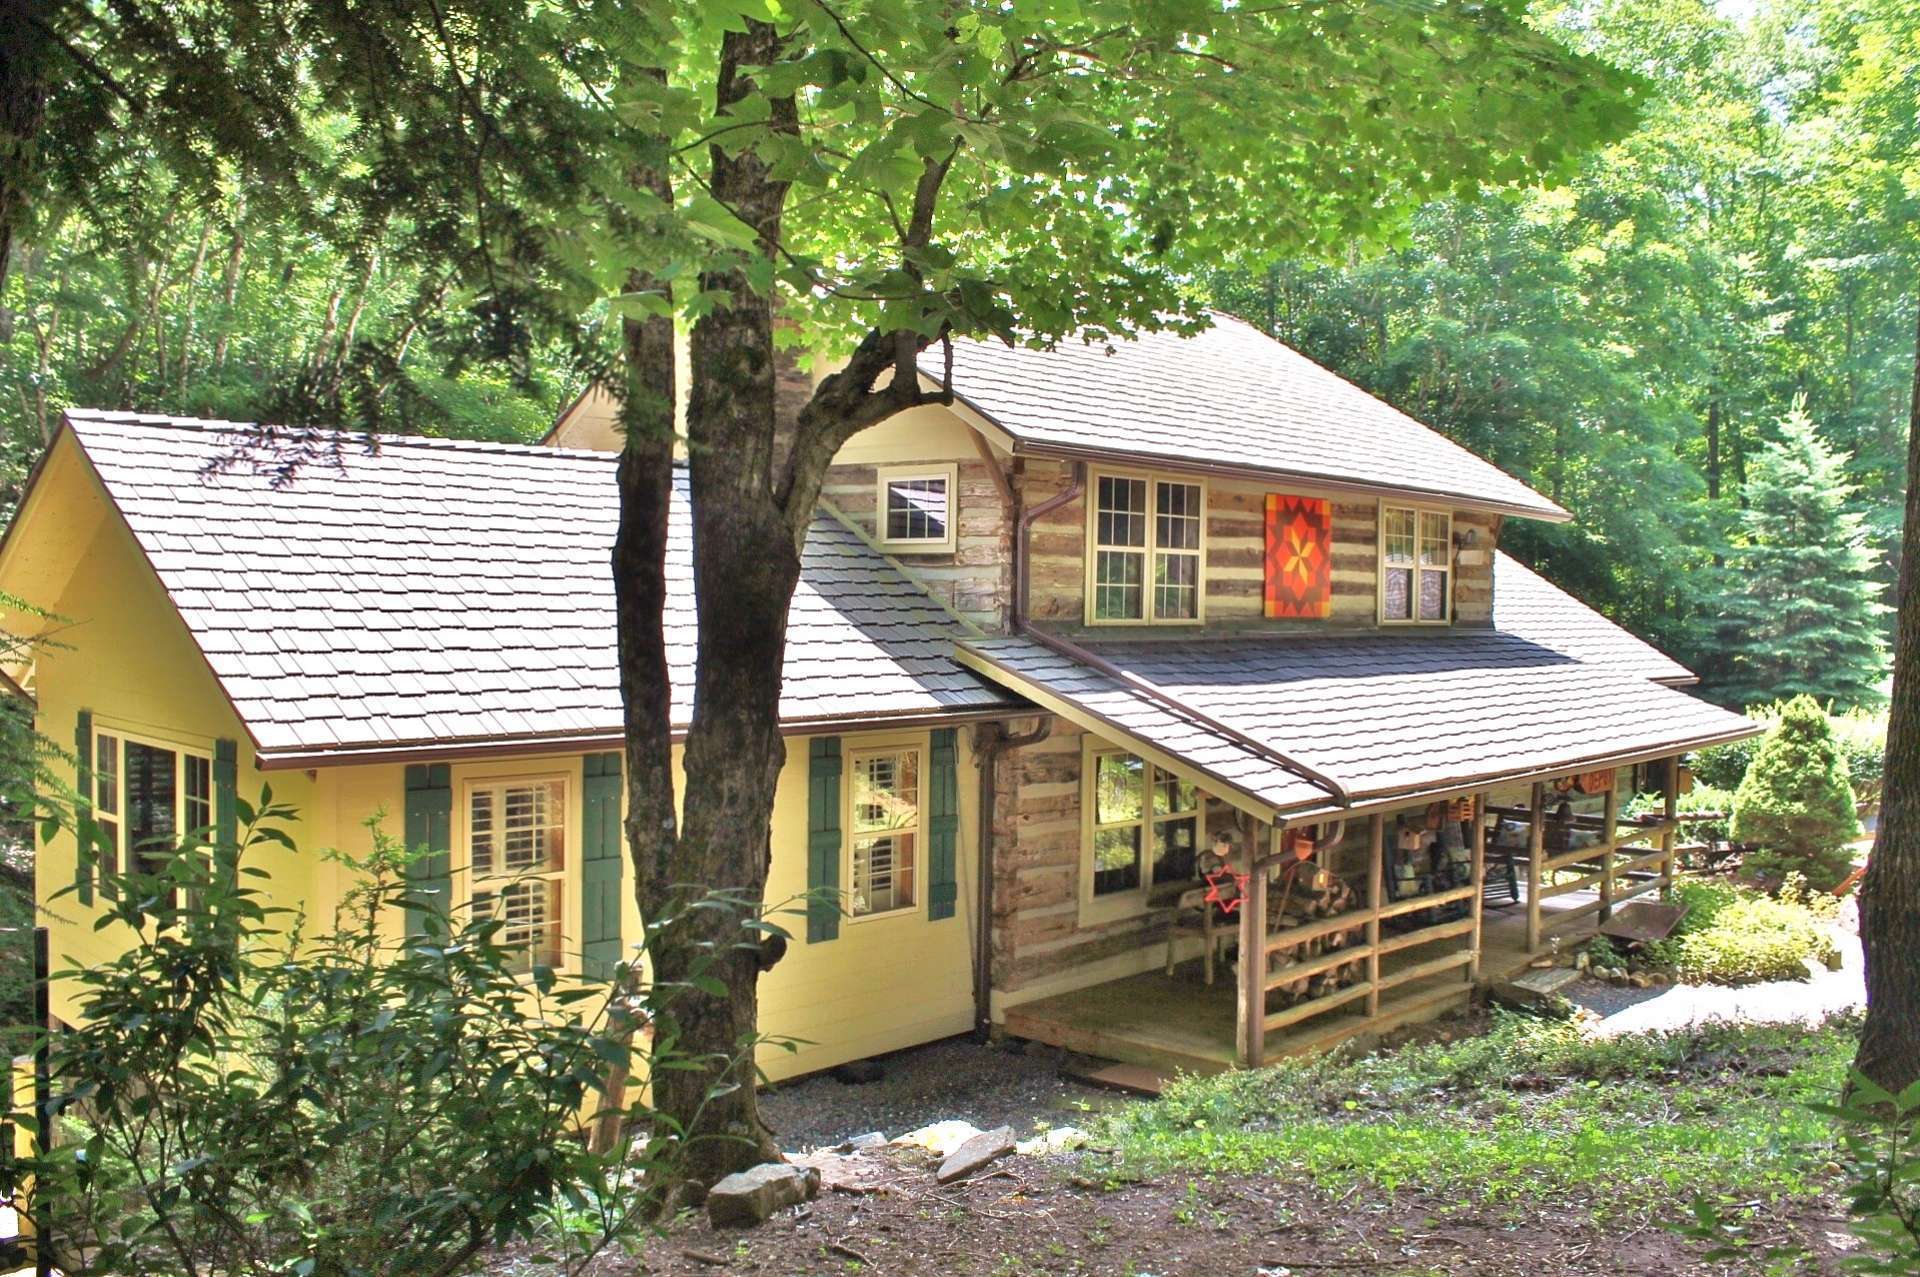 This classic antique 2-bedroom, 2-bath log cabin is located in the desirable Stonebridge community nestled in a private park-like wooded setting with bold rushing creek.